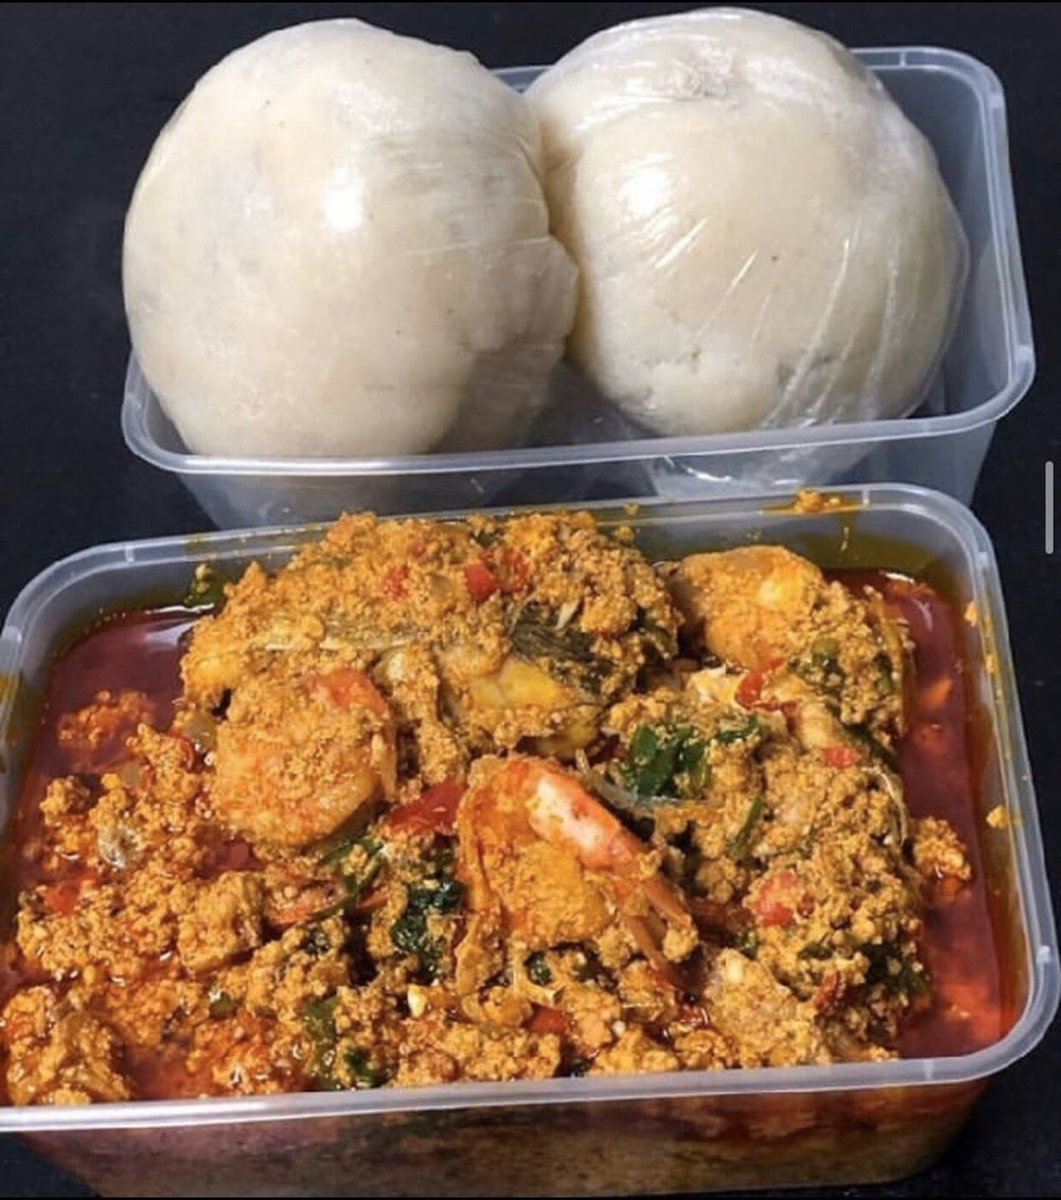 Good morning oh! Food vendor is greeting you oh!!
Come and buy what we’re selling oh!!!

Lunch pack menu for tomorrow 
1. Stir fry spaghetti & chicken N1500
2. Fried rice & croaker fish N2000
3. Egusi & poundoyam with chicken N2000

Lagos delivery only